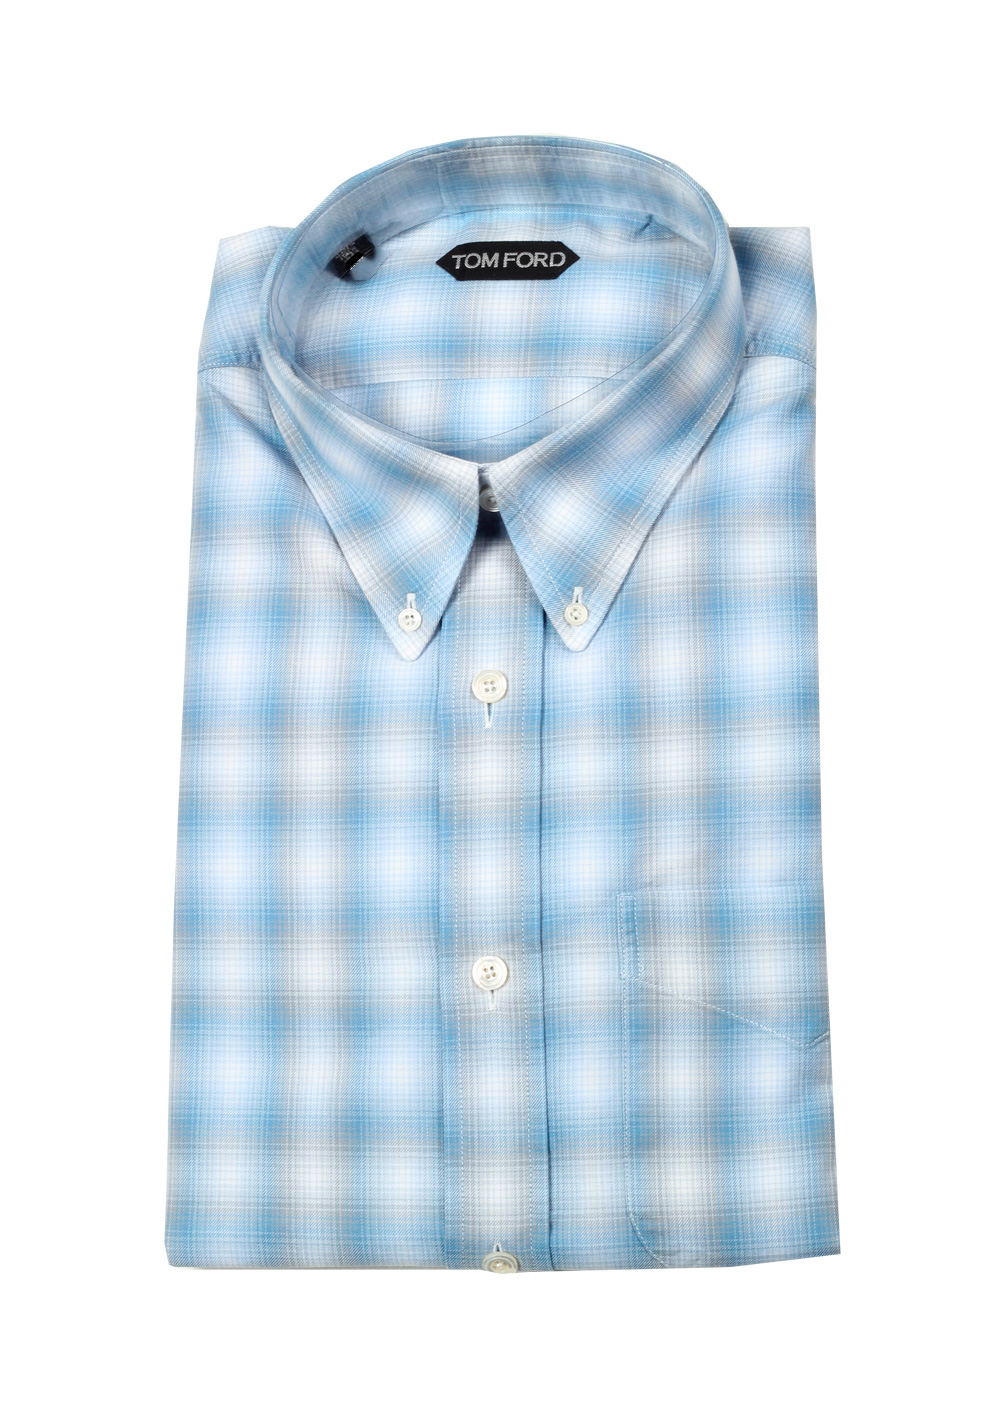 TOM FORD Checked White Blue Button Down Casual Shirt Size 40 / 15,75 U.S. | Costume Limité